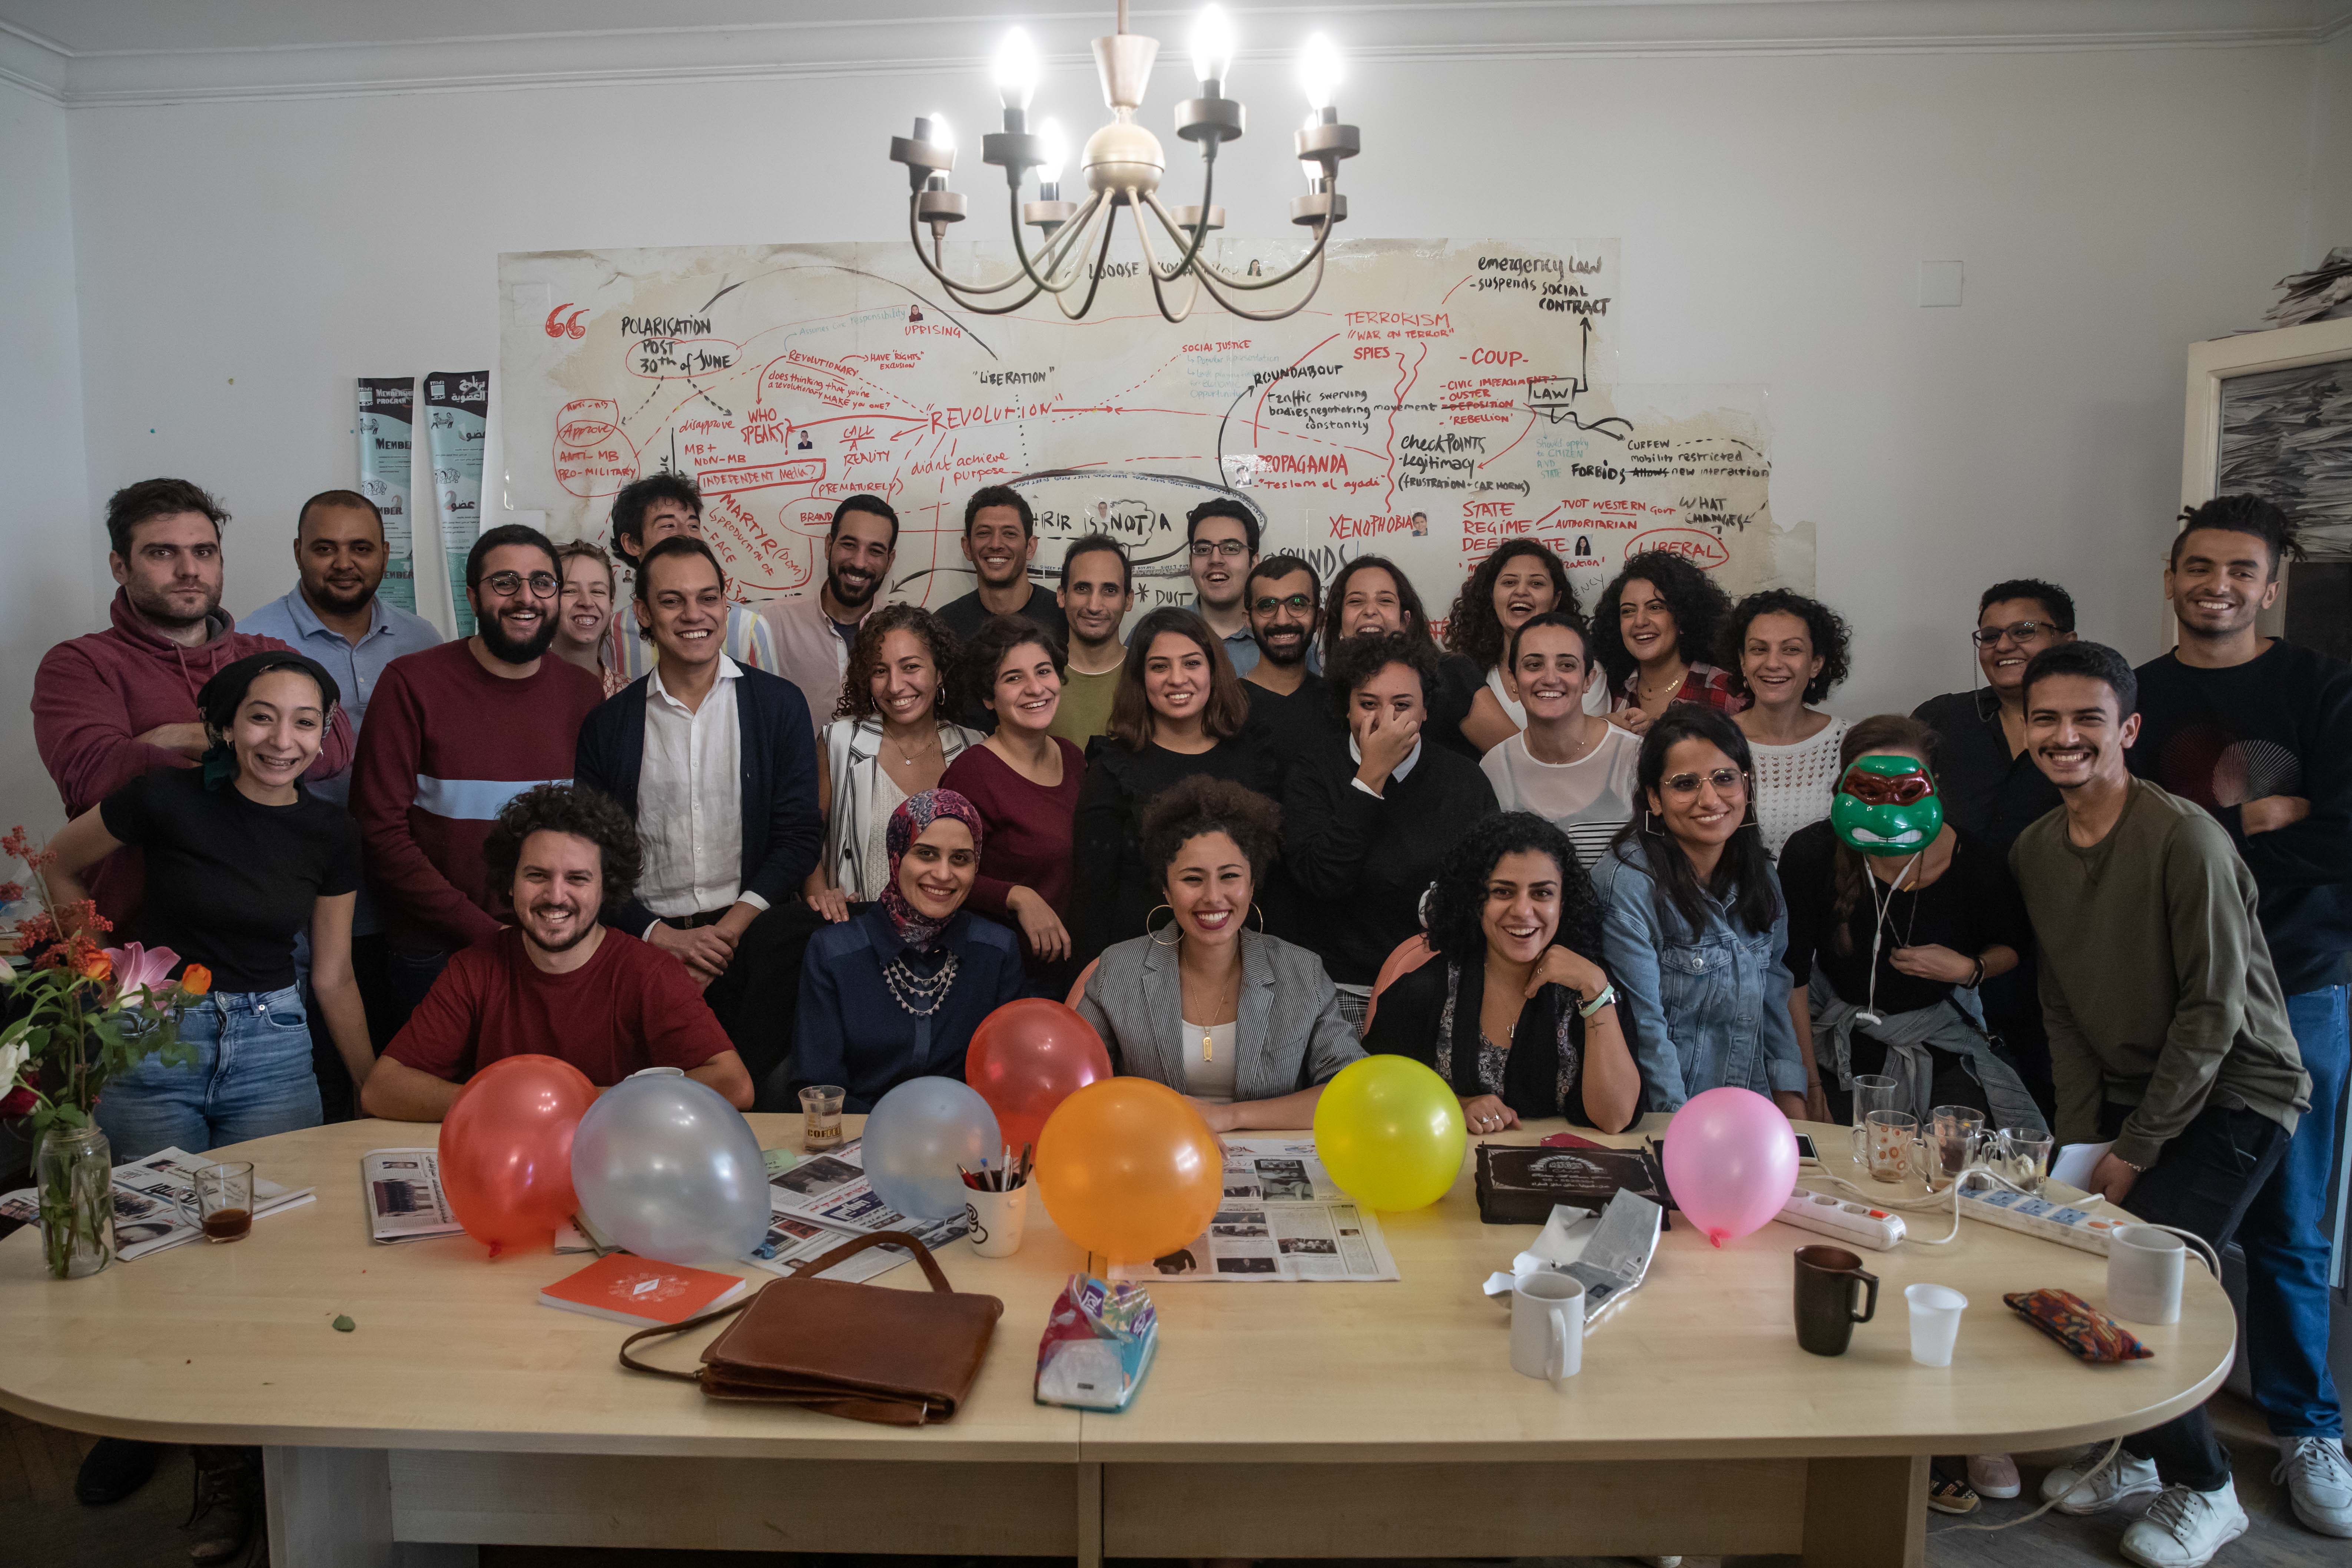 The team at Mada Masr that have vowed to keep reporting despite the crackdown